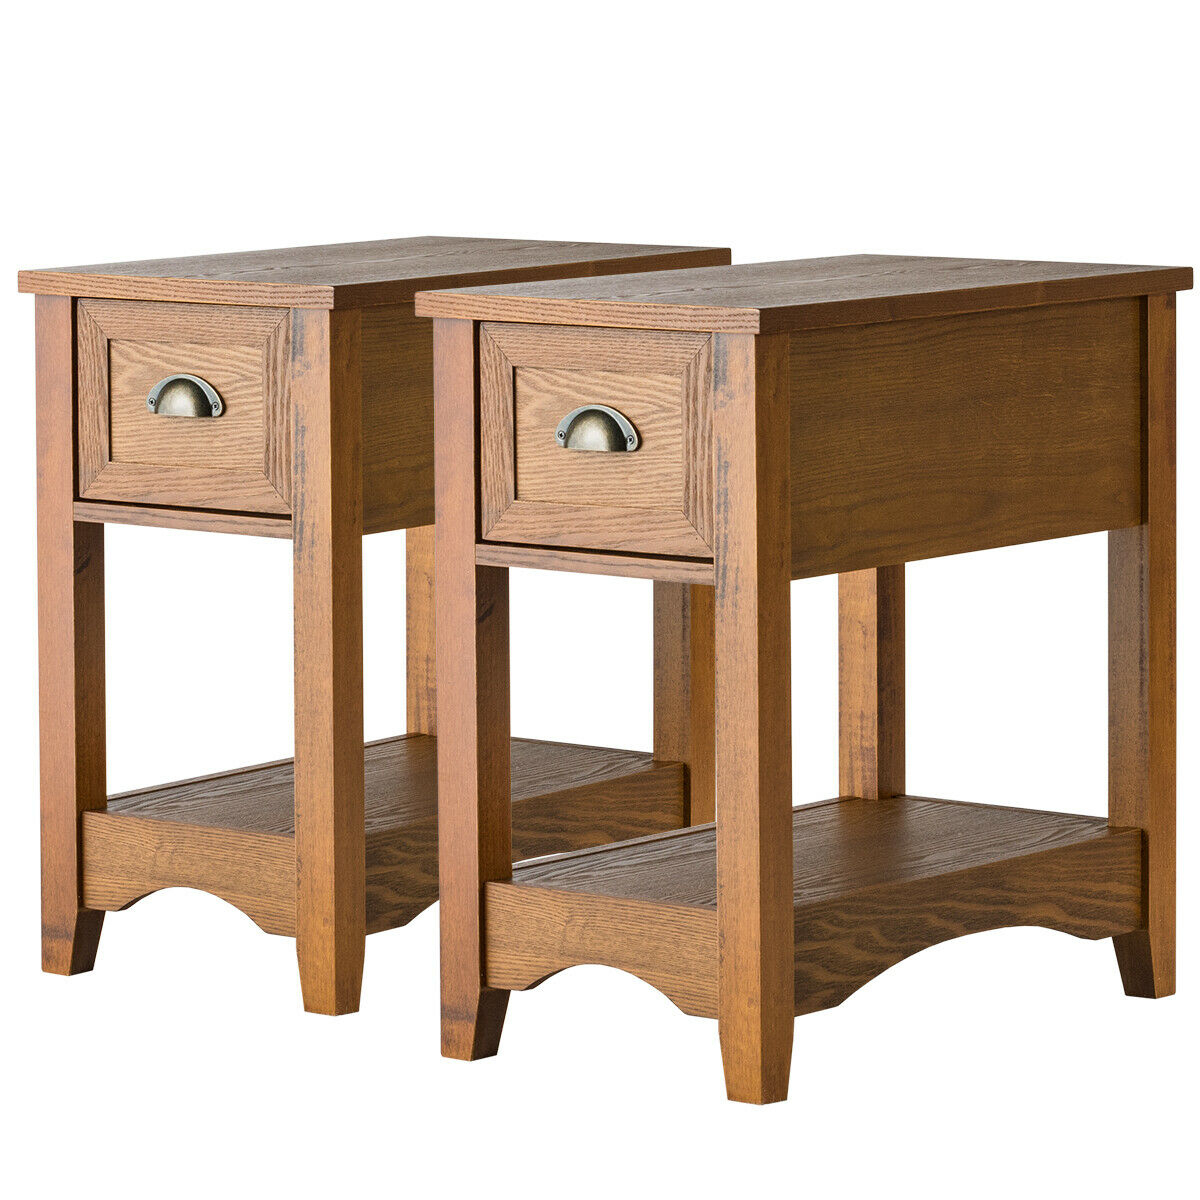 Set Of 2 Contemporary Side End Table Compact Table W/ Drawer Nightstand Espresso/Tawny/Walnut - Tawny